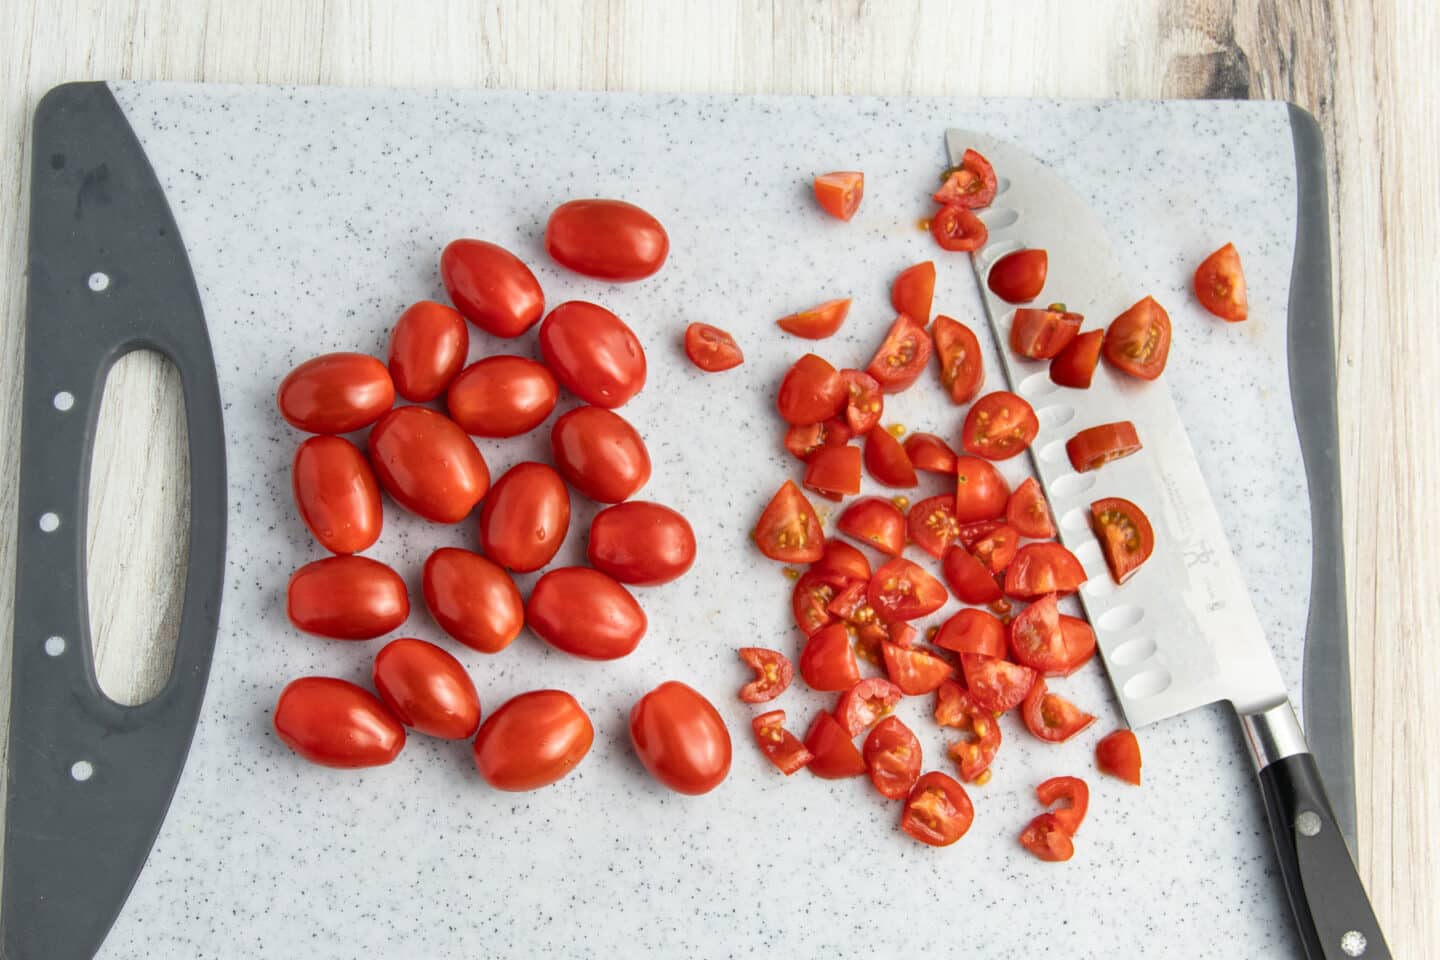 Picture or tomatoes being diced.